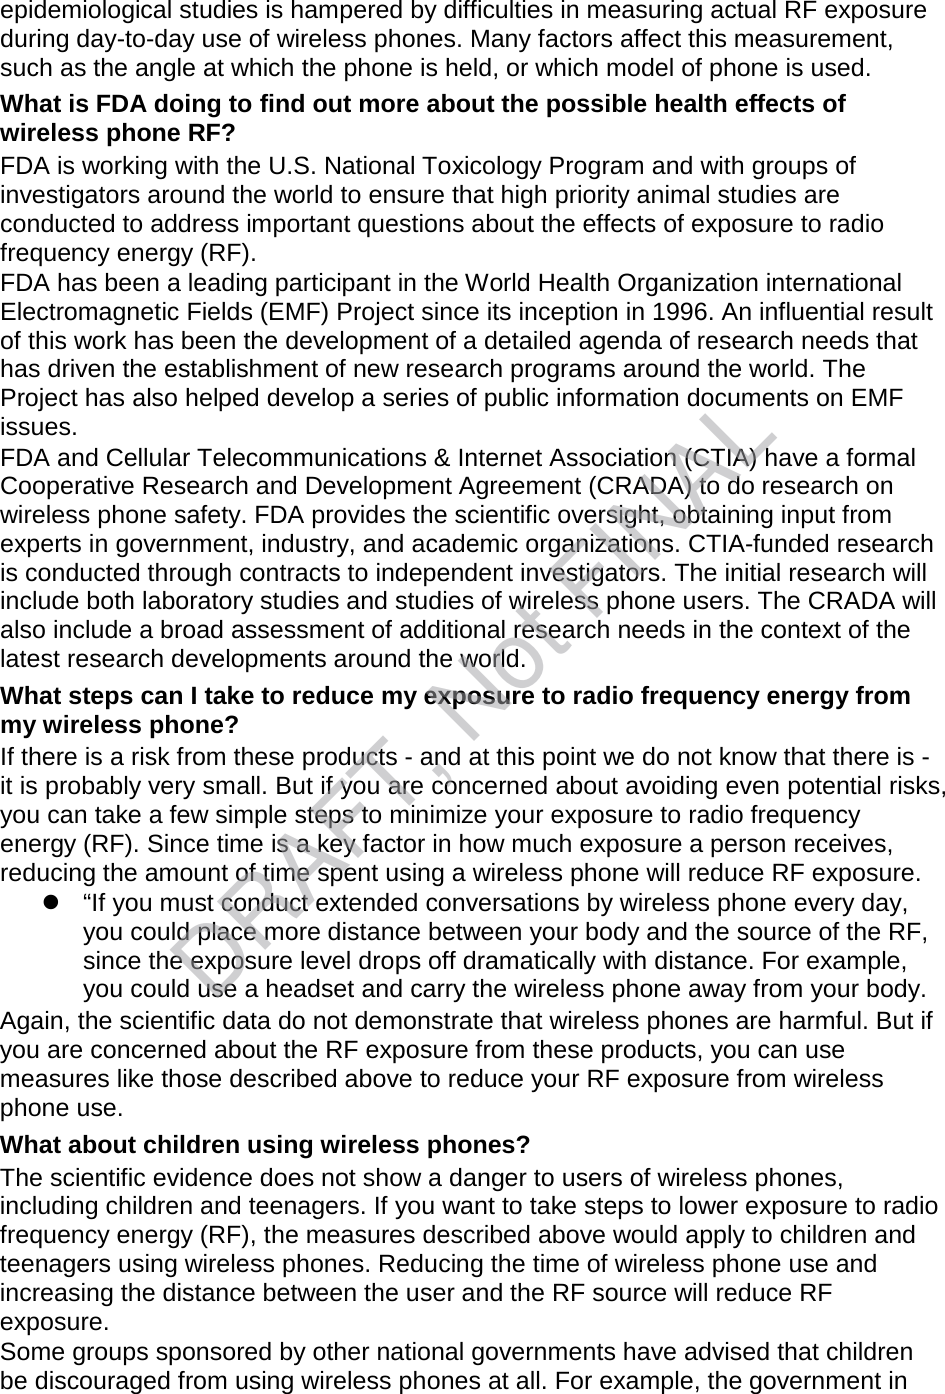 epidemiological studies is hampered by difficulties in measuring actual RF exposure during day-to-day use of wireless phones. Many factors affect this measurement, such as the angle at which the phone is held, or which model of phone is used. What is FDA doing to find out more about the possible health effects of wireless phone RF? FDA is working with the U.S. National Toxicology Program and with groups of investigators around the world to ensure that high priority animal studies are conducted to address important questions about the effects of exposure to radio frequency energy (RF). FDA has been a leading participant in the World Health Organization international Electromagnetic Fields (EMF) Project since its inception in 1996. An influential result of this work has been the development of a detailed agenda of research needs that has driven the establishment of new research programs around the world. The Project has also helped develop a series of public information documents on EMF issues. FDA and Cellular Telecommunications &amp; Internet Association (CTIA) have a formal Cooperative Research and Development Agreement (CRADA) to do research on wireless phone safety. FDA provides the scientific oversight, obtaining input from experts in government, industry, and academic organizations. CTIA-funded research is conducted through contracts to independent investigators. The initial research will include both laboratory studies and studies of wireless phone users. The CRADA will also include a broad assessment of additional research needs in the context of the latest research developments around the world. What steps can I take to reduce my exposure to radio frequency energy from my wireless phone? If there is a risk from these products - and at this point we do not know that there is - it is probably very small. But if you are concerned about avoiding even potential risks, you can take a few simple steps to minimize your exposure to radio frequency energy (RF). Since time is a key factor in how much exposure a person receives, reducing the amount of time spent using a wireless phone will reduce RF exposure. “If you must conduct extended conversations by wireless phone every day,you could place more distance between your body and the source of the RF,since the exposure level drops off dramatically with distance. For example,you could use a headset and carry the wireless phone away from your body.Again, the scientific data do not demonstrate that wireless phones are harmful. But if you are concerned about the RF exposure from these products, you can use measures like those described above to reduce your RF exposure from wireless phone use. What about children using wireless phones? The scientific evidence does not show a danger to users of wireless phones, including children and teenagers. If you want to take steps to lower exposure to radio frequency energy (RF), the measures described above would apply to children and teenagers using wireless phones. Reducing the time of wireless phone use and increasing the distance between the user and the RF source will reduce RF exposure. Some groups sponsored by other national governments have advised that children be discouraged from using wireless phones at all. For example, the government in DRAFT, Not FINAL